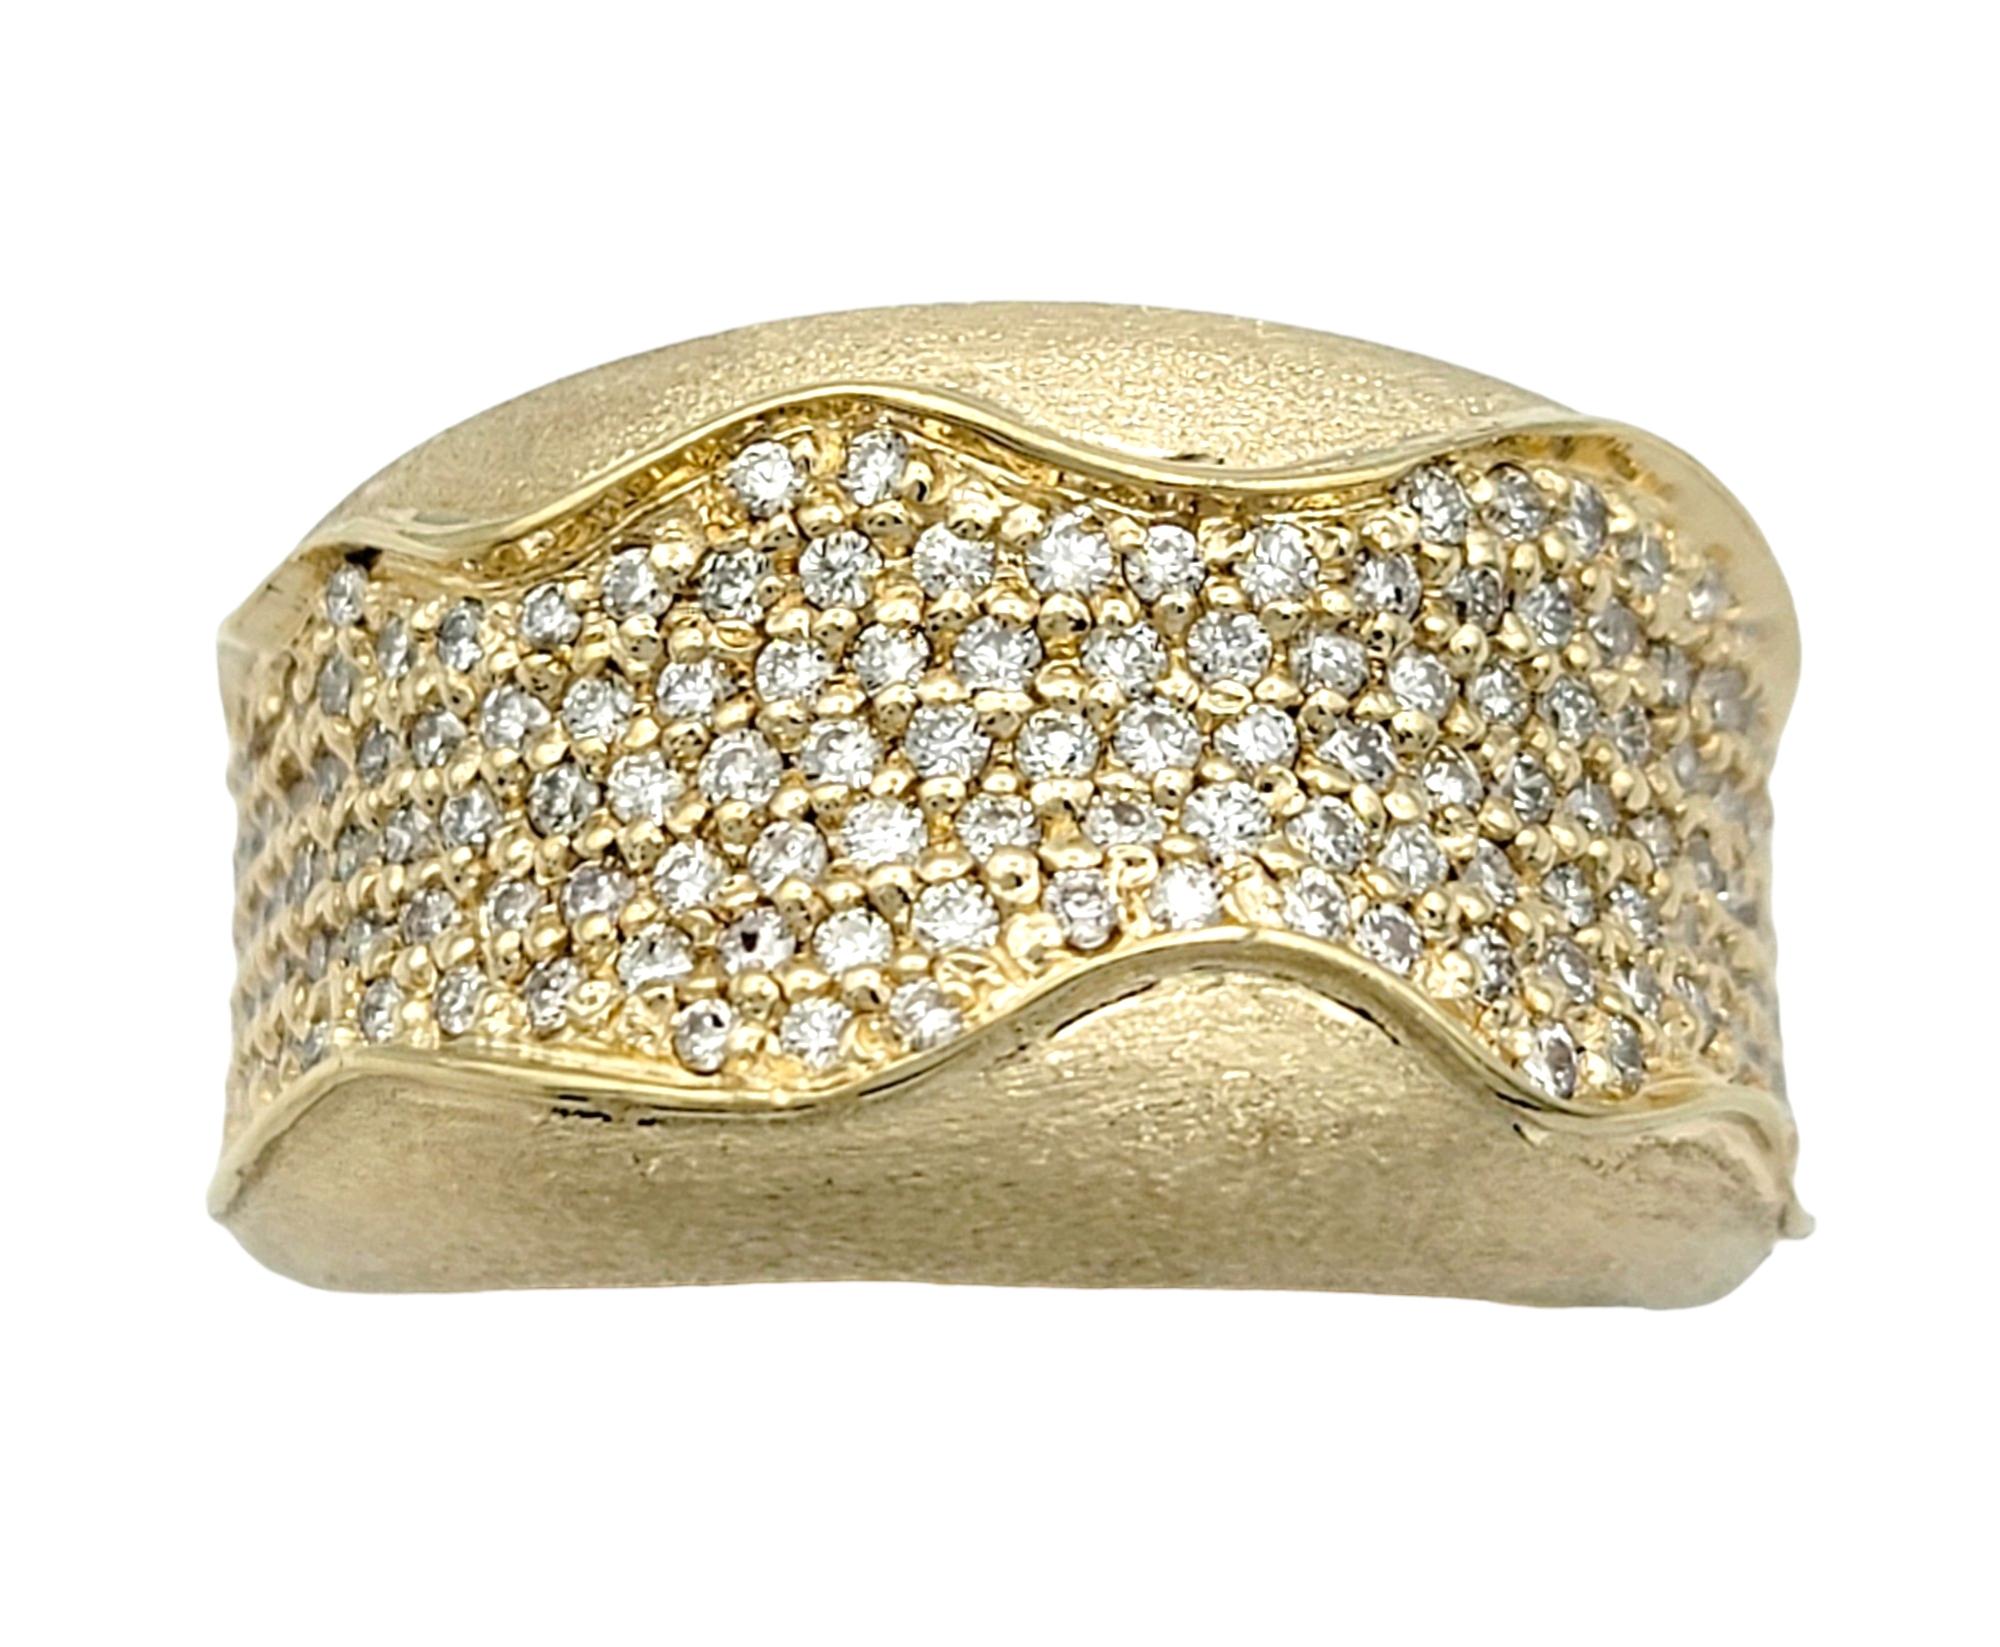 Ring Size: 8.5

This pavé diamond band ring exudes a sense of fluidity and elegance with its wavy design, beautifully crafted in 14 karat yellow gold. The sinuous curves of the ring create a dynamic and organic feel, reminiscent of gentle waves on